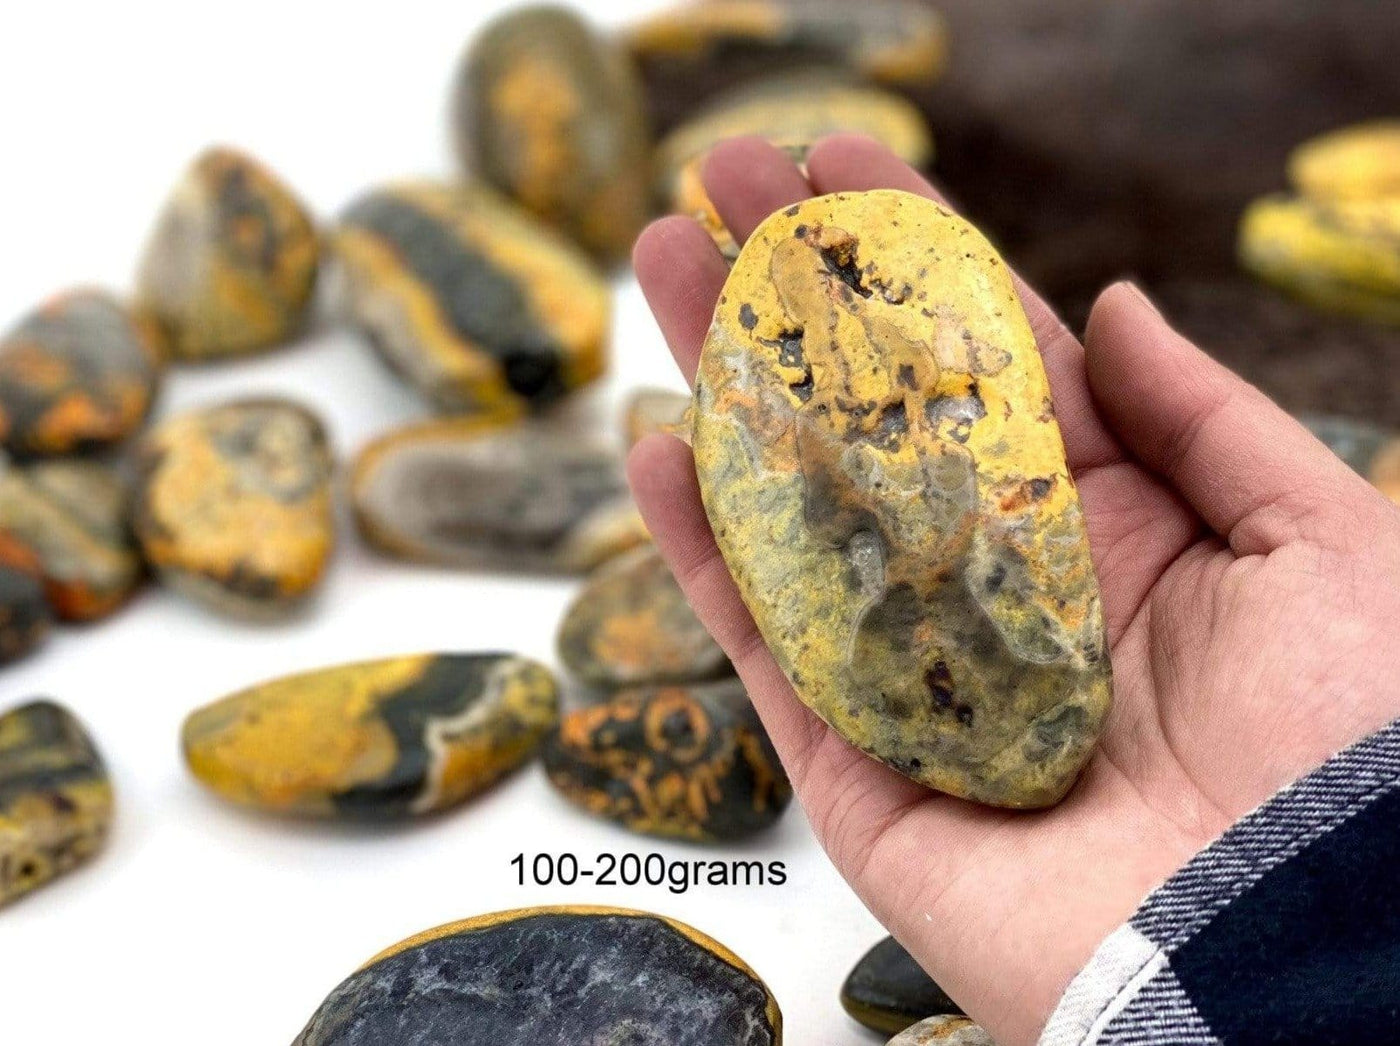 bumble bee jasper available in under 100-200 grams